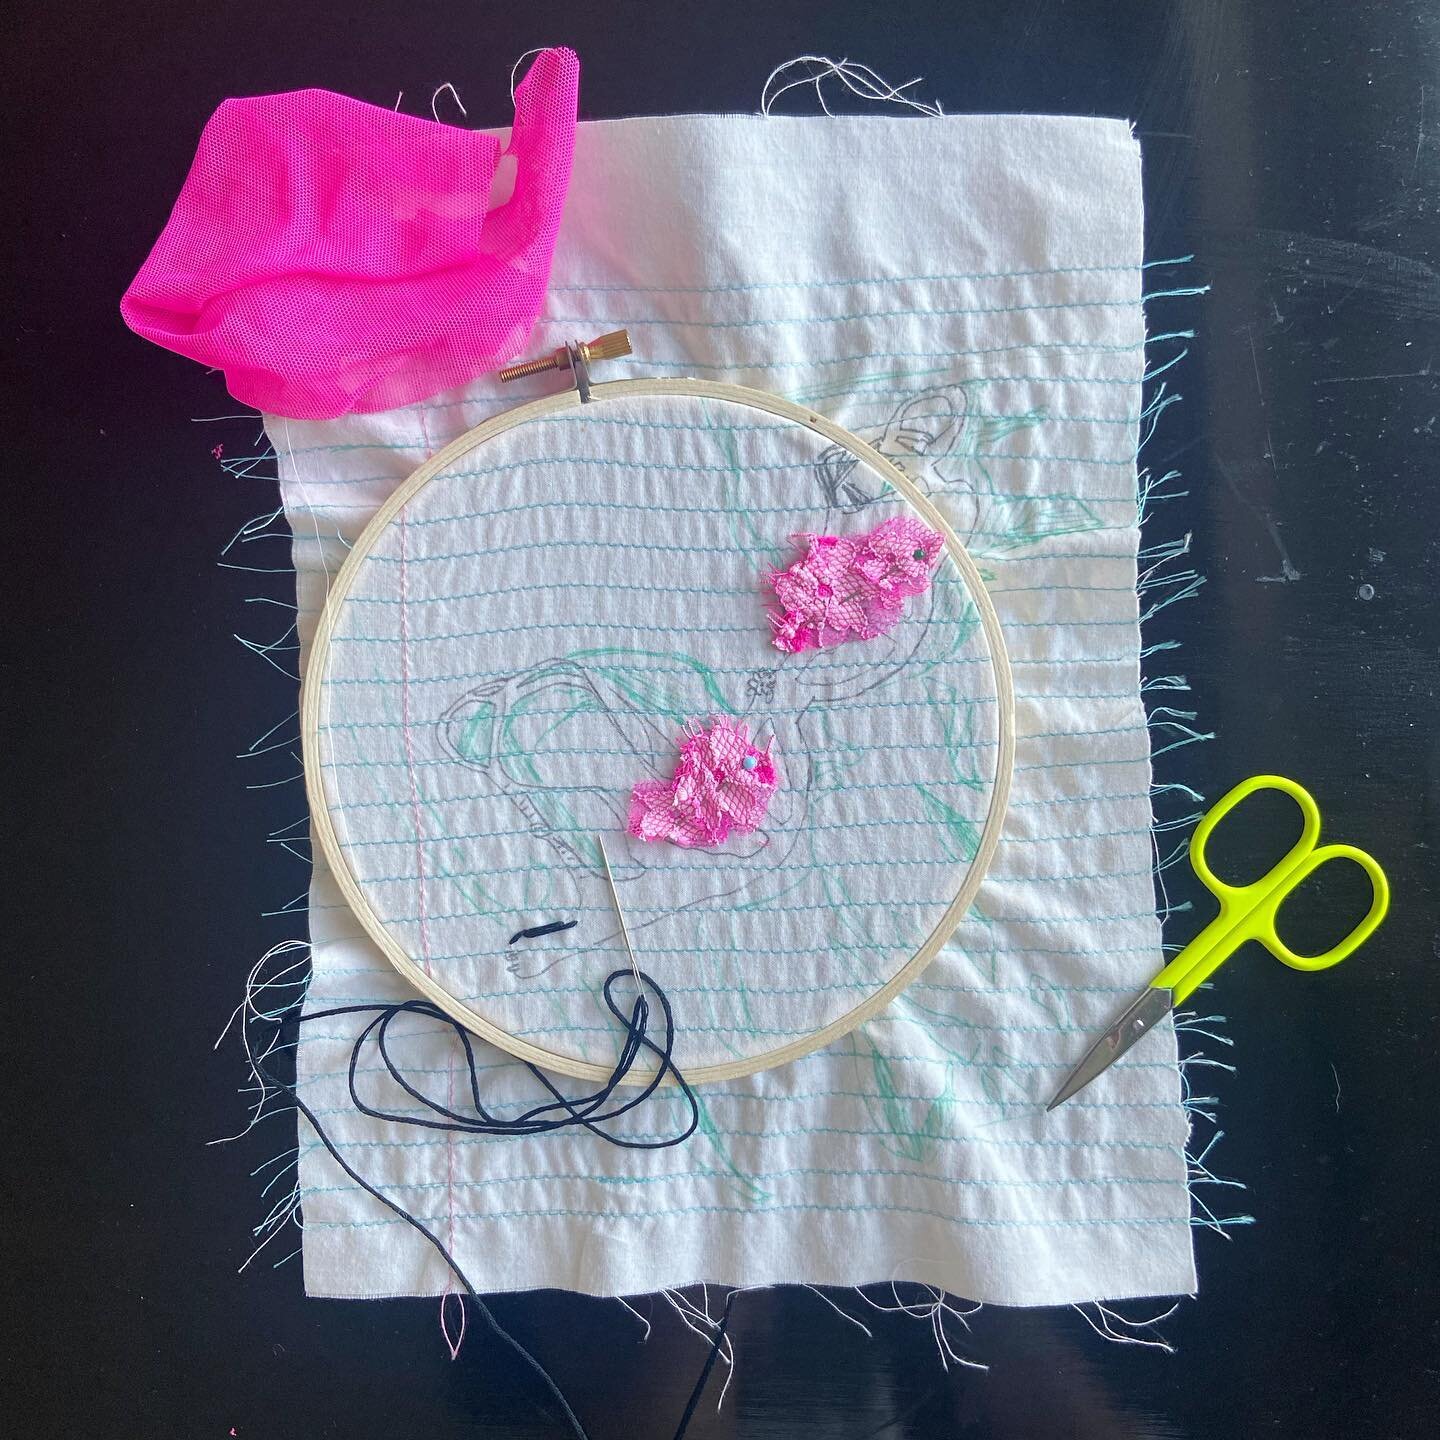 Making a start on the newest #neonstitchclub creation for the #interwovenstories show at @artscouncilofprinceton. Excited to share some thoughts I&rsquo;ve been having. Watch this space!
🧡
Big thanks to @interwovenstories, @tinypricksproject and @va